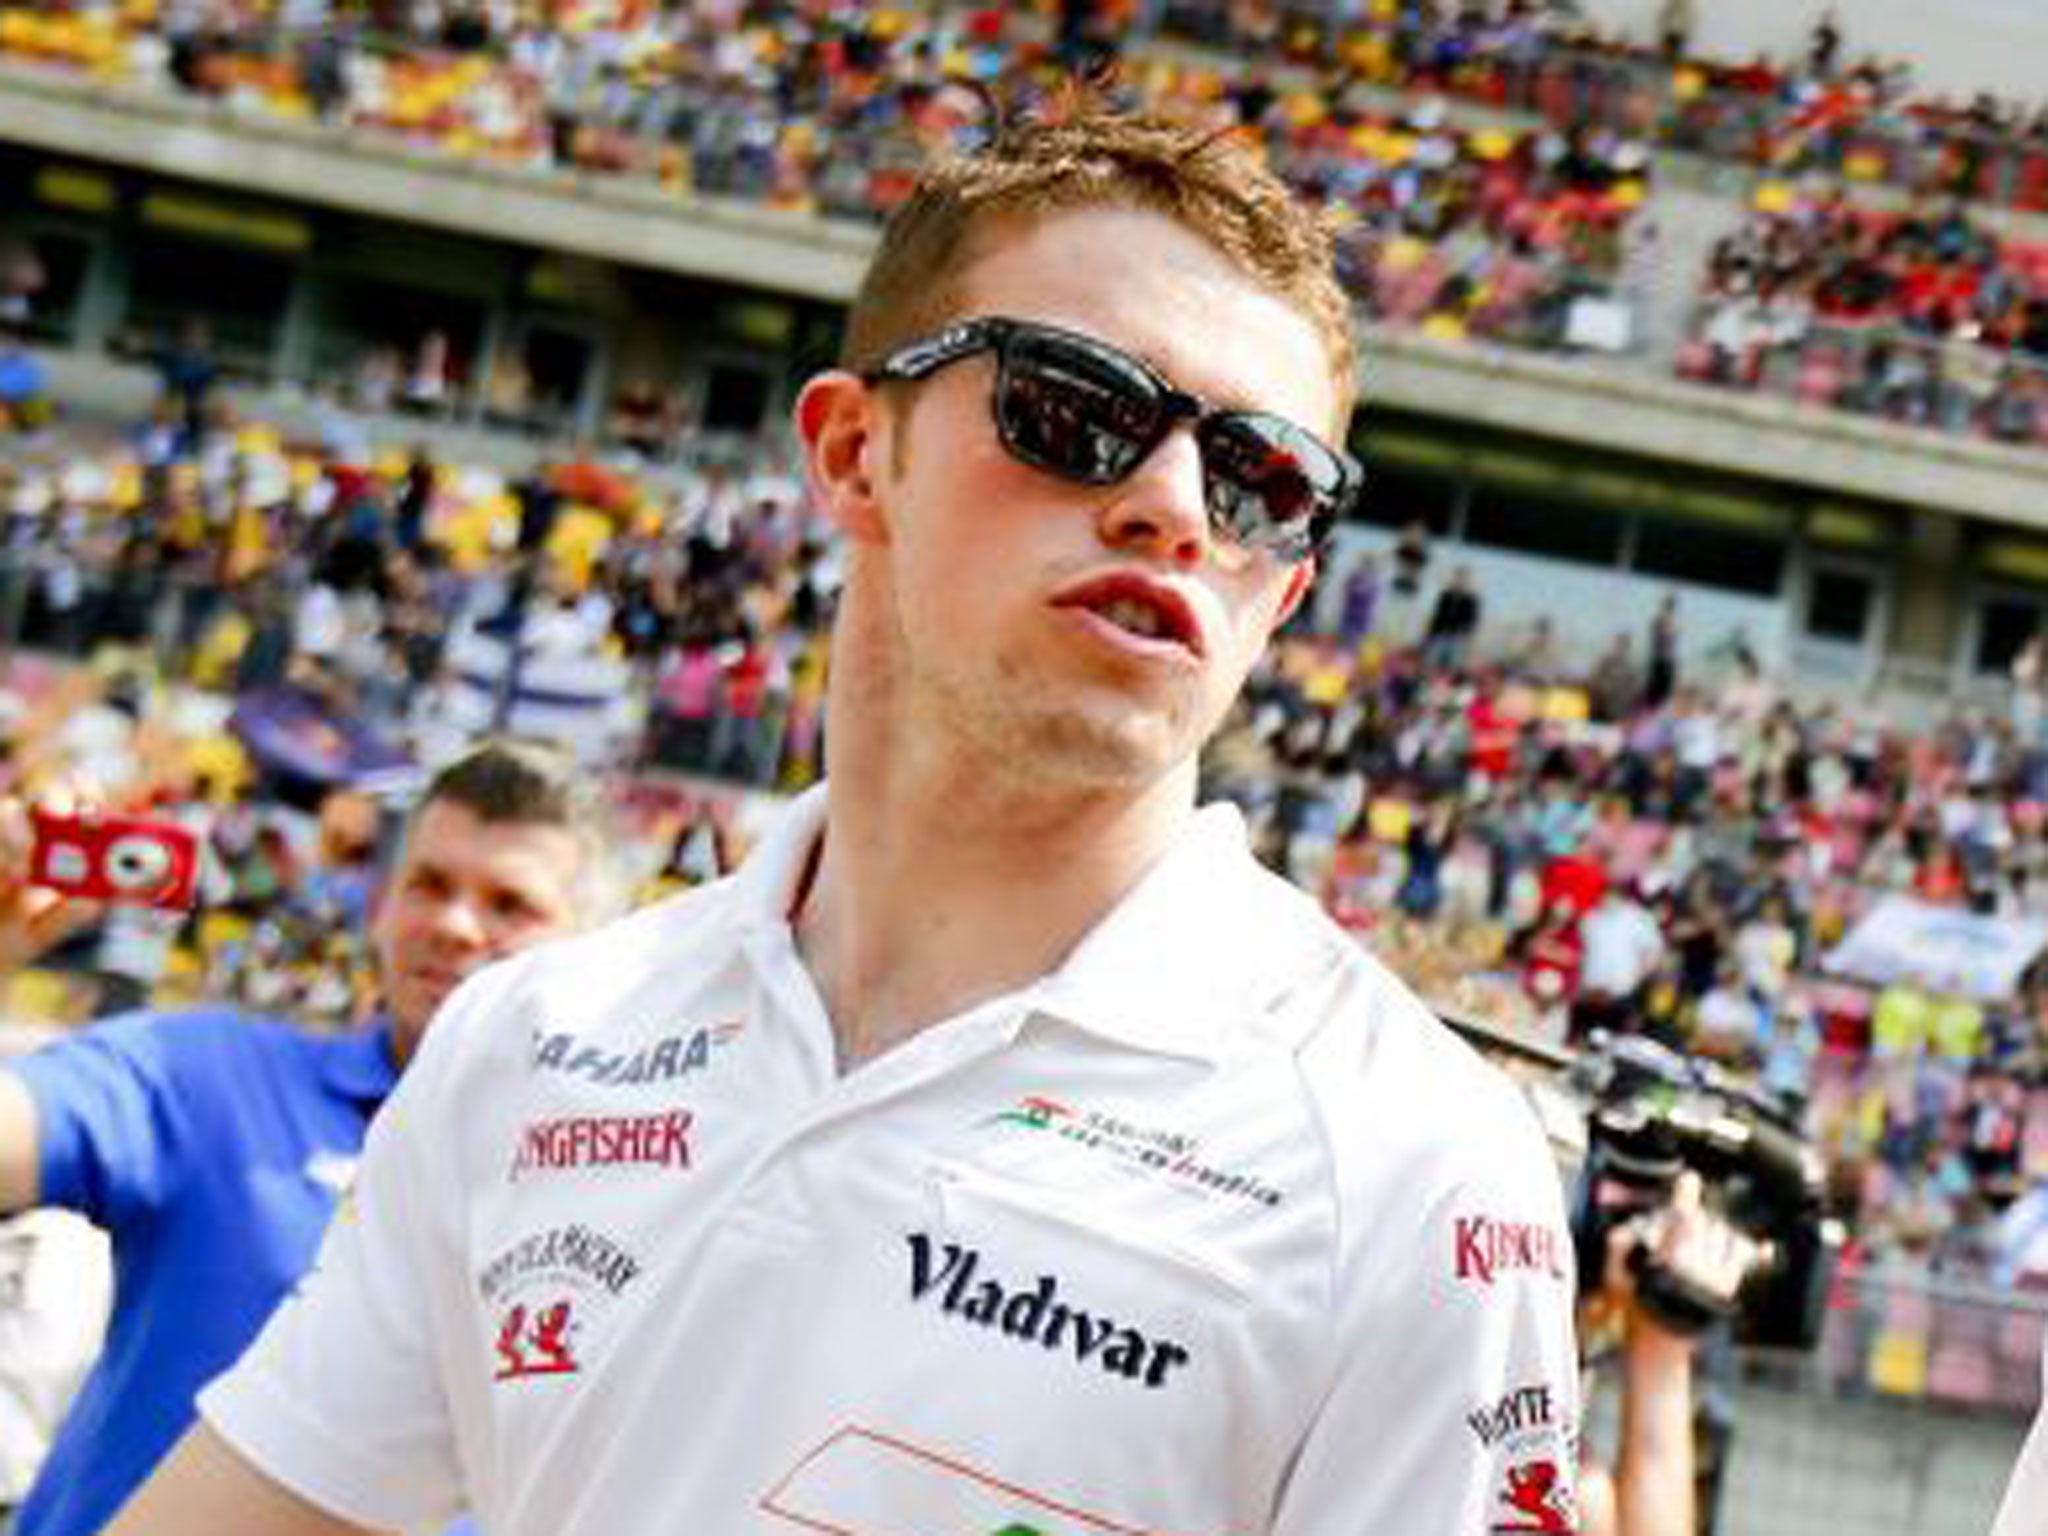 Paul Di Resta survived a first-lap run-in which cost several places